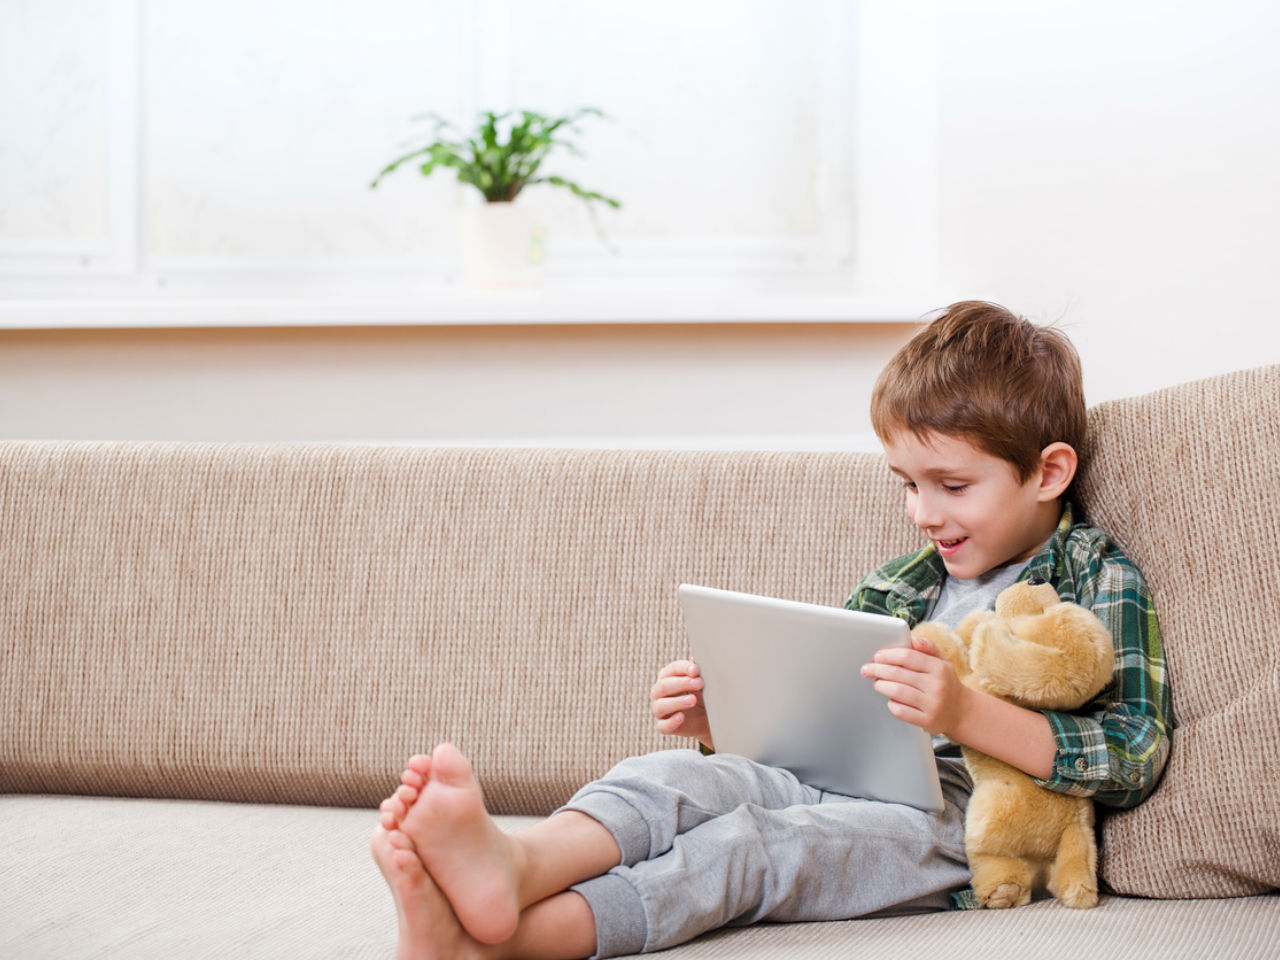 5 Ways To Prevent Your Kids From Seeing Inappropriate Youtube